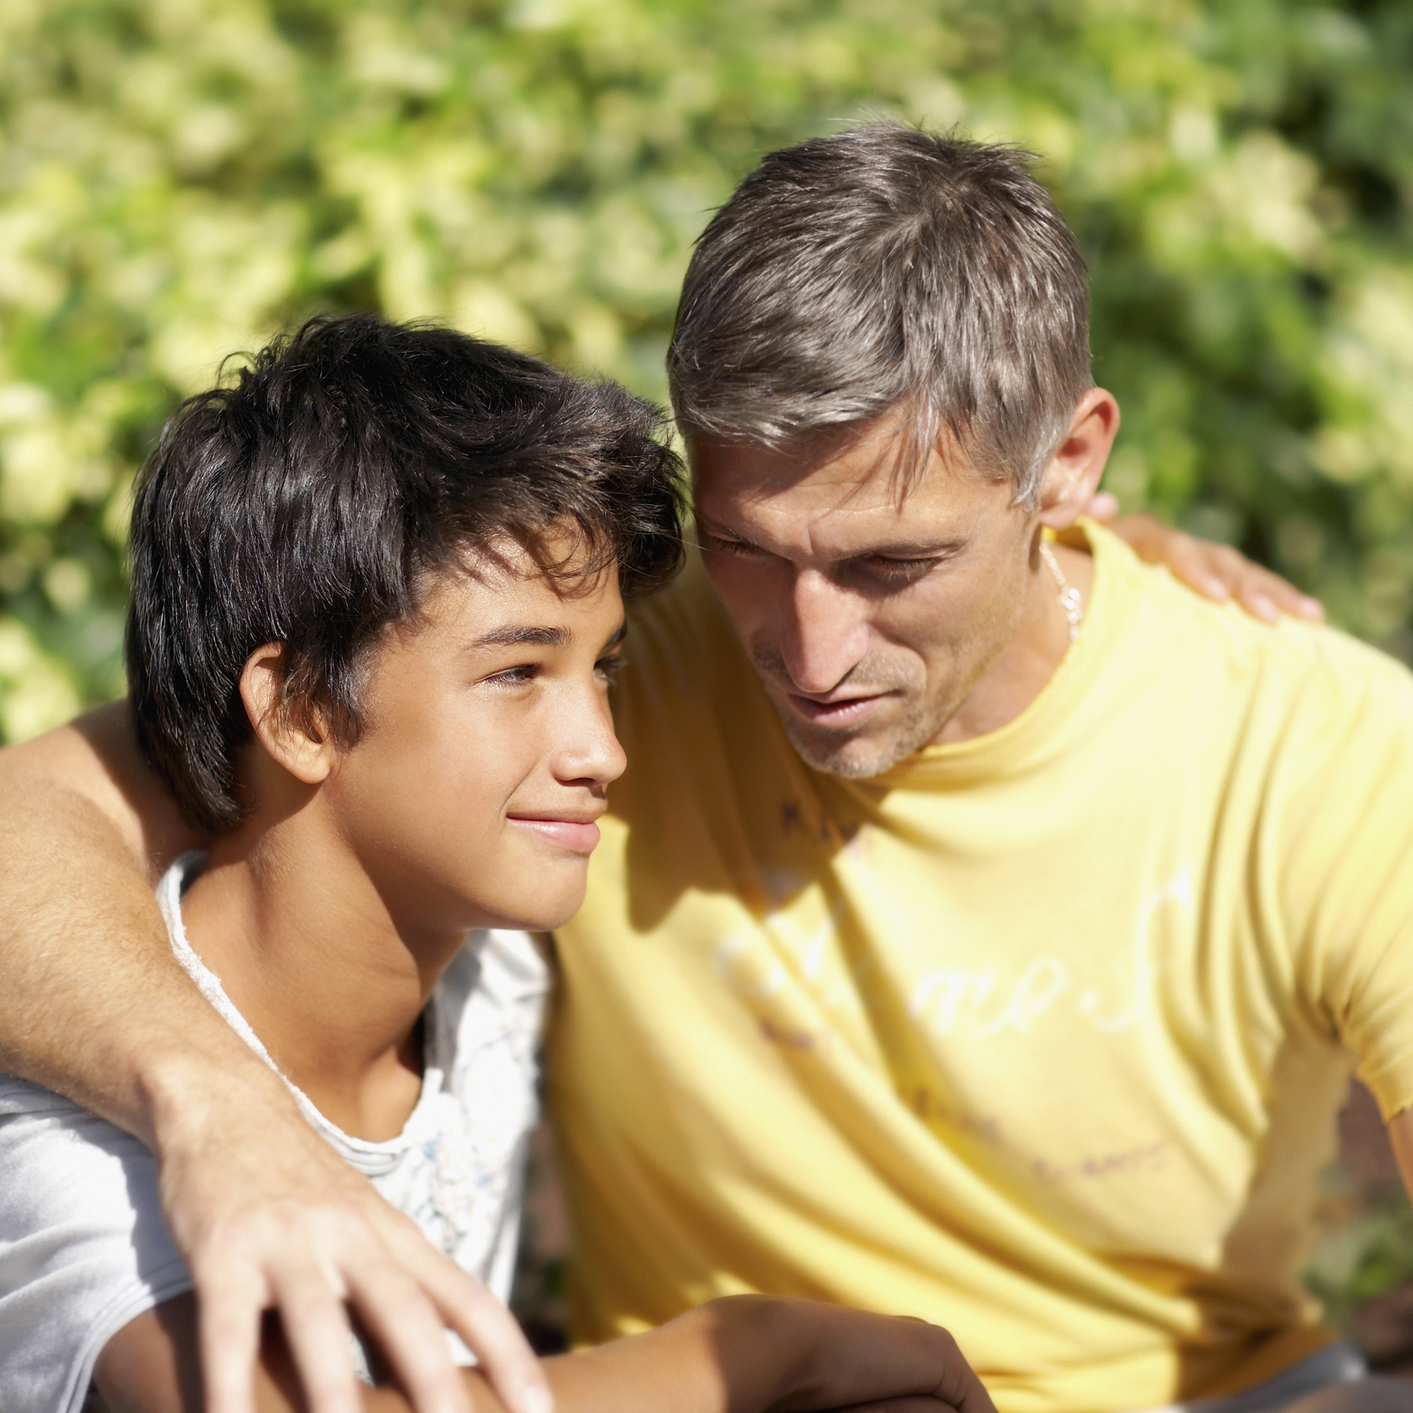 My Experience Of Fathers Day Changed After Son